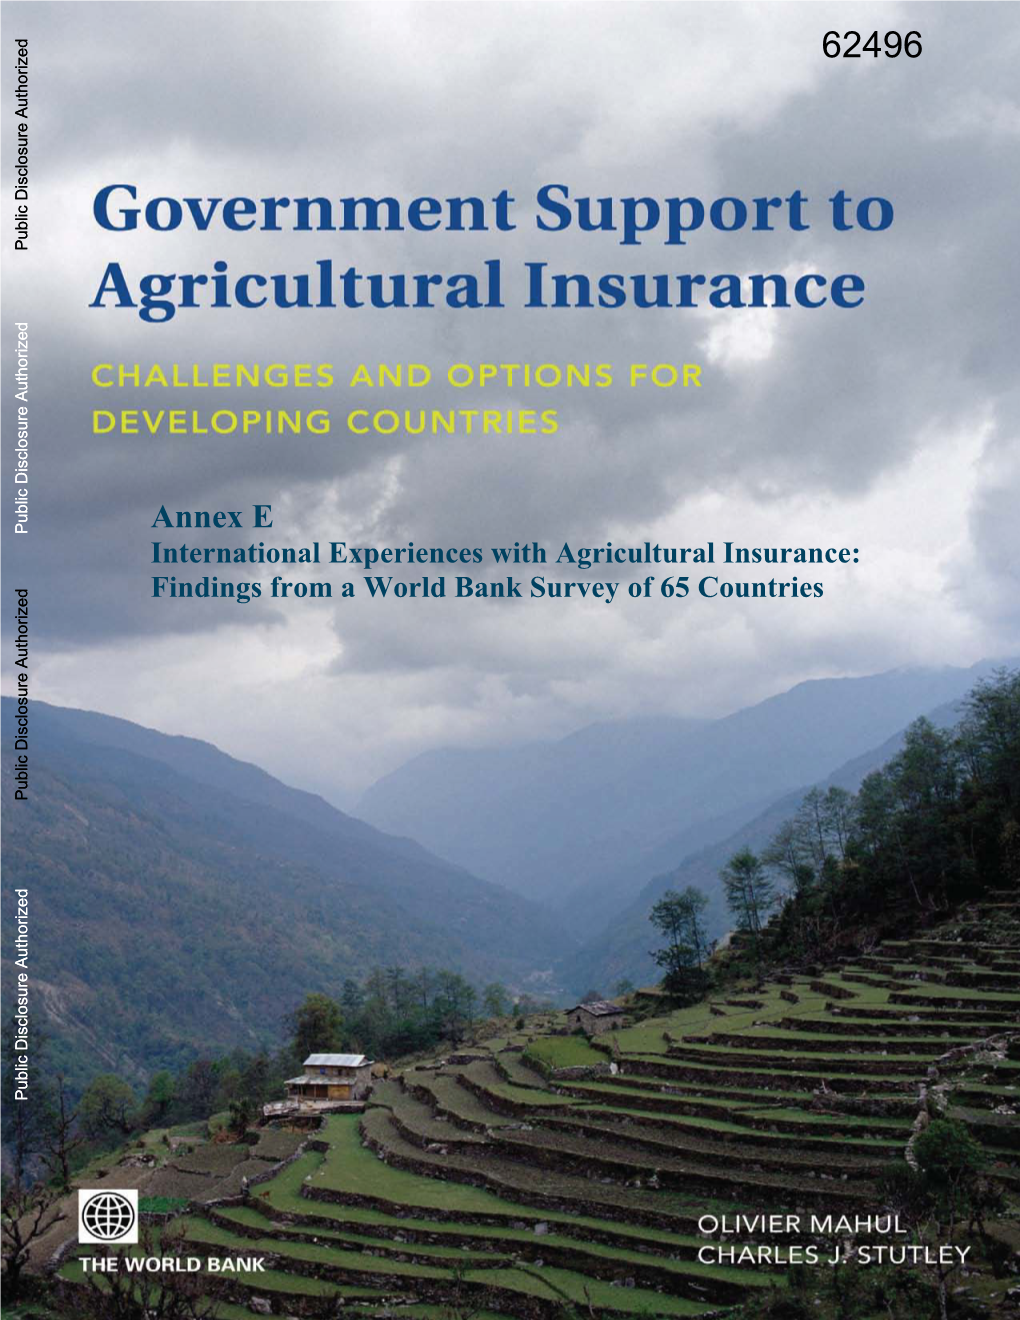 Overview on Agricultural Insurance: ARGENTINA